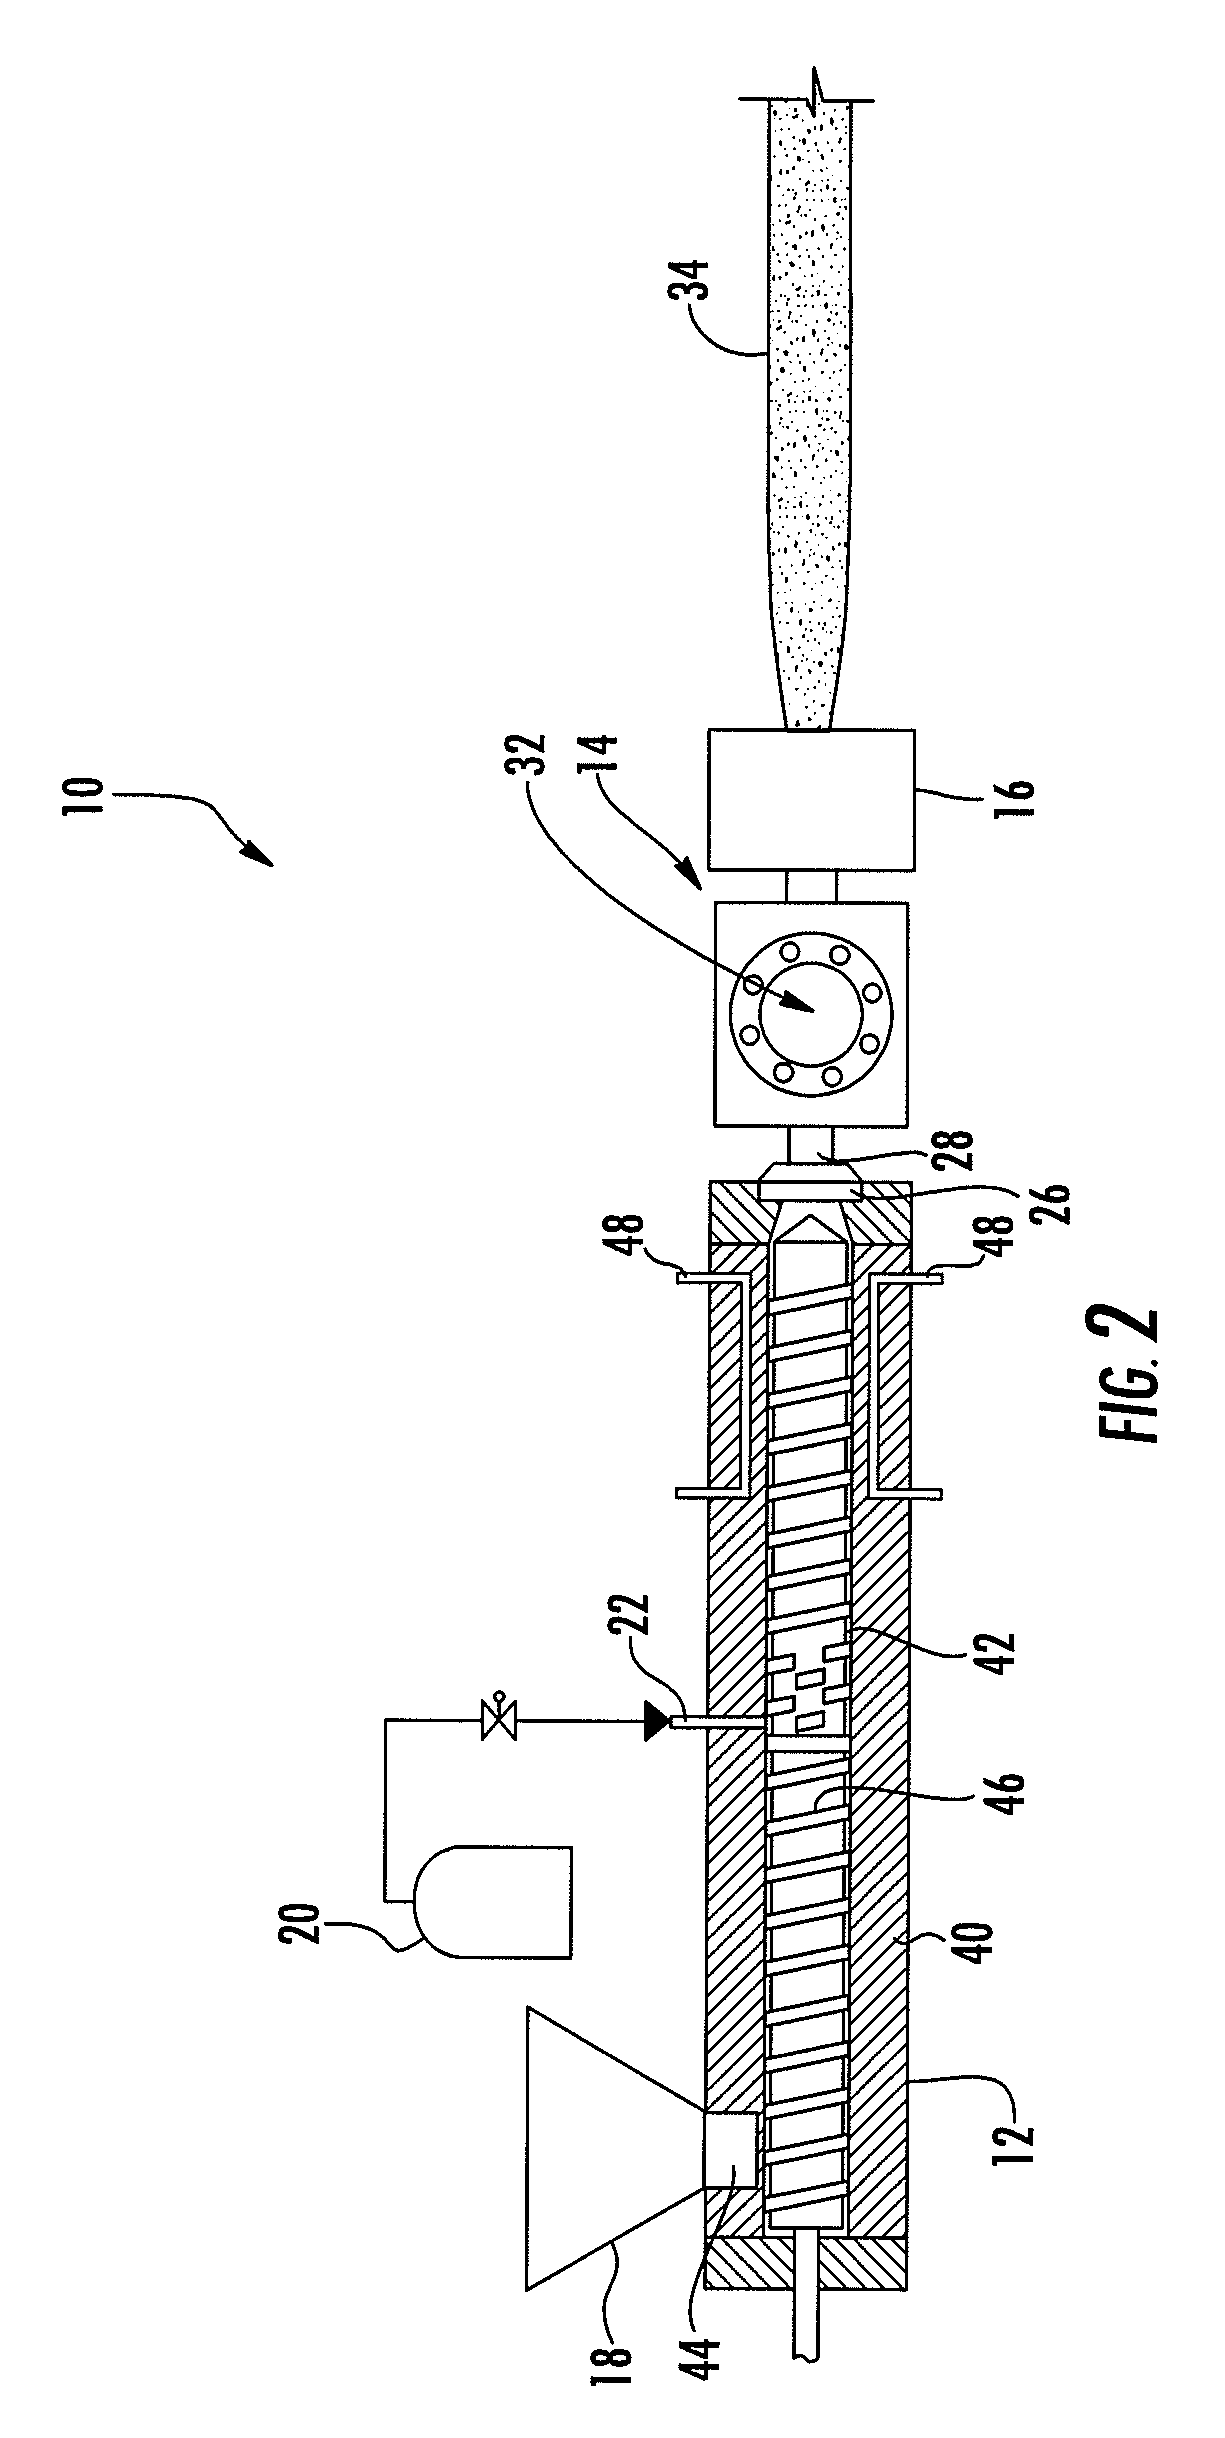 Apparatus and Method for Preparing a UV-Induced Crosslinked Foam